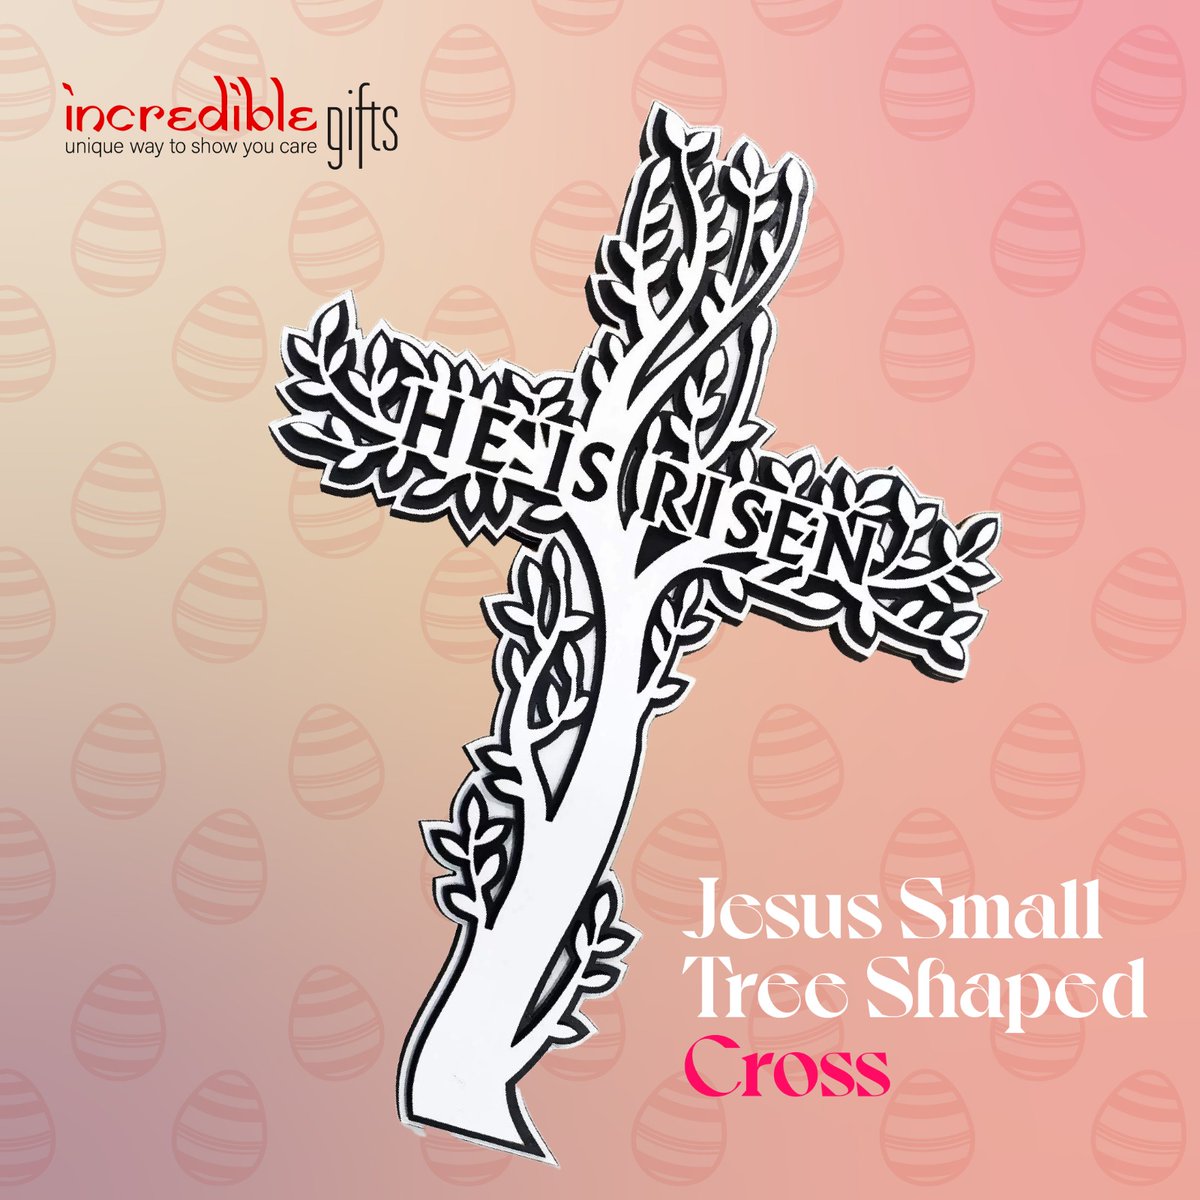 Embrace faith and love with our small wooden crosses. Perfect for Christian gifts, these timeless symbols inspire and uplift. Discover the beauty of spiritual gifting at Incredible Gifts. 🙏✨
.
.
.
#ChristianGifts #IncredibleGifts #SpiritualInspiration #GiftsOfFaith 🎁